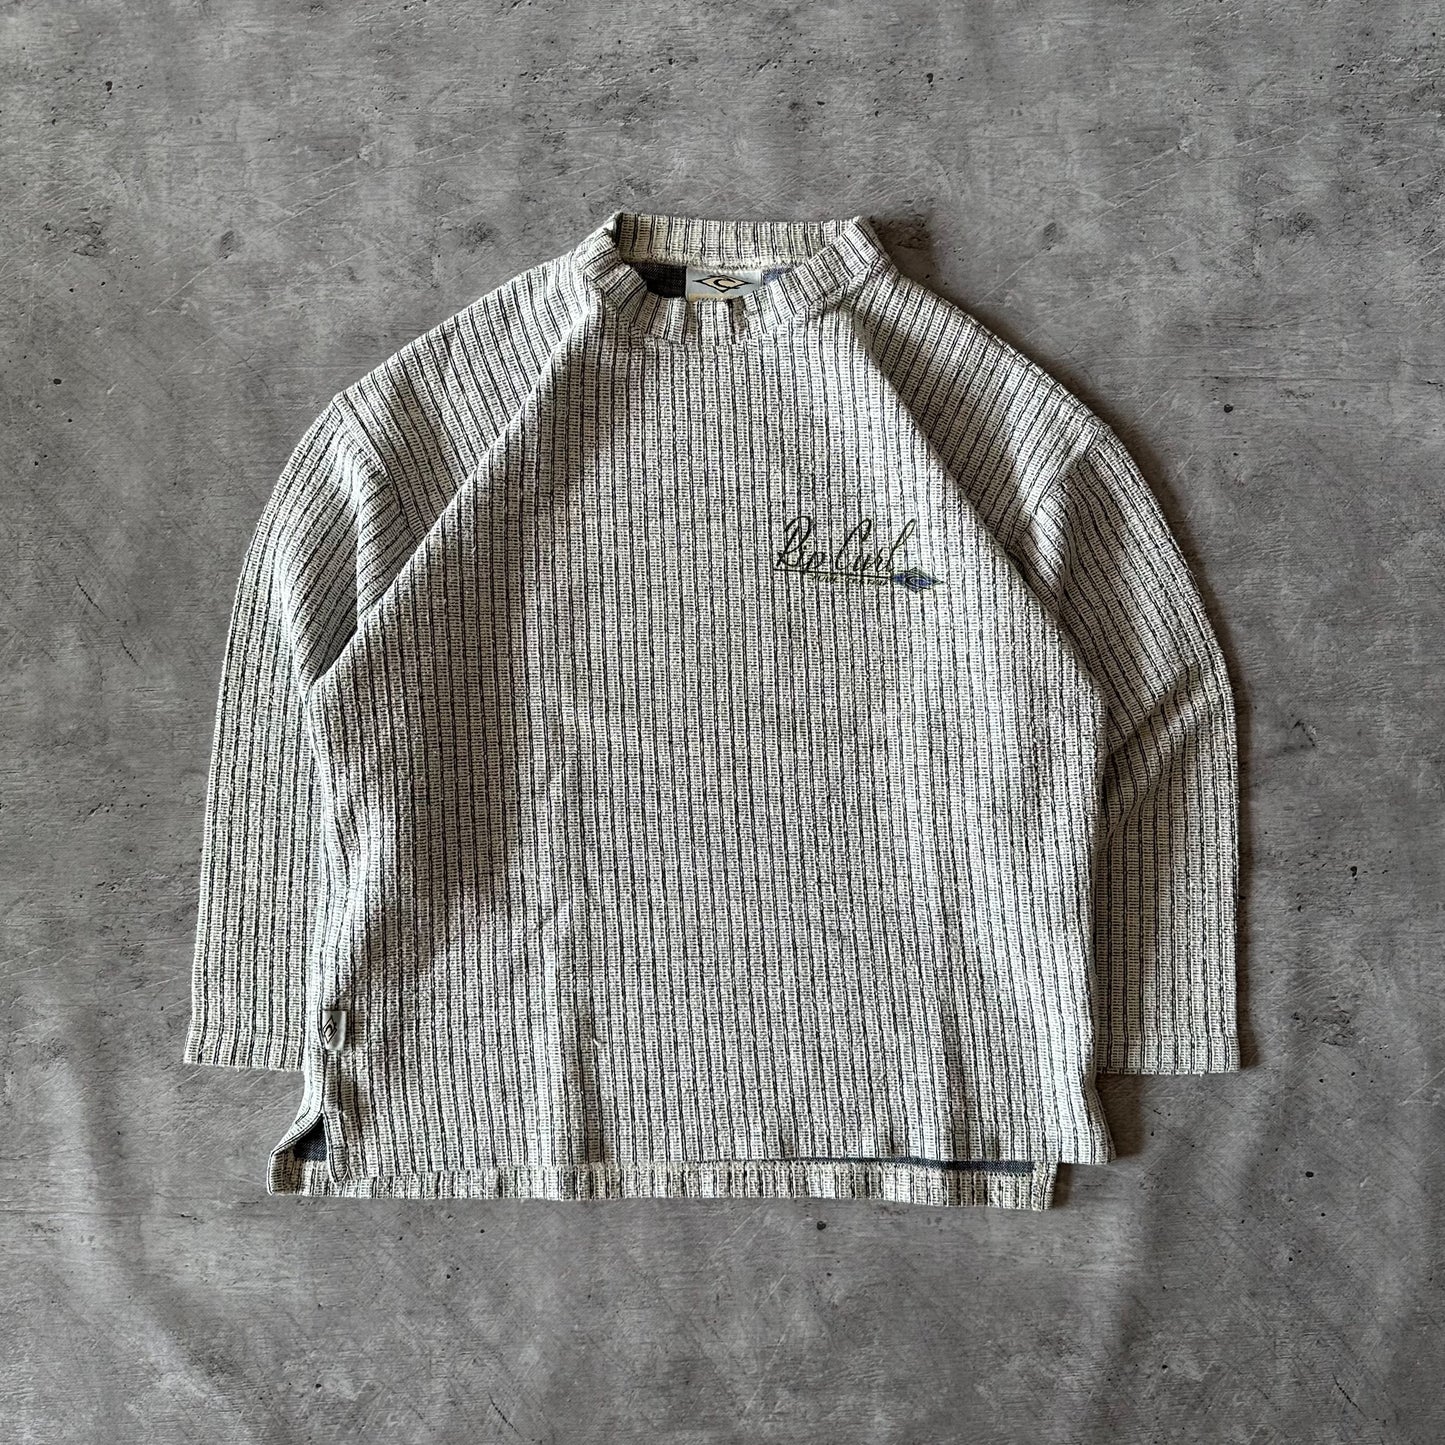 Vintage Rip Curl 'Tube Tested' Sweater